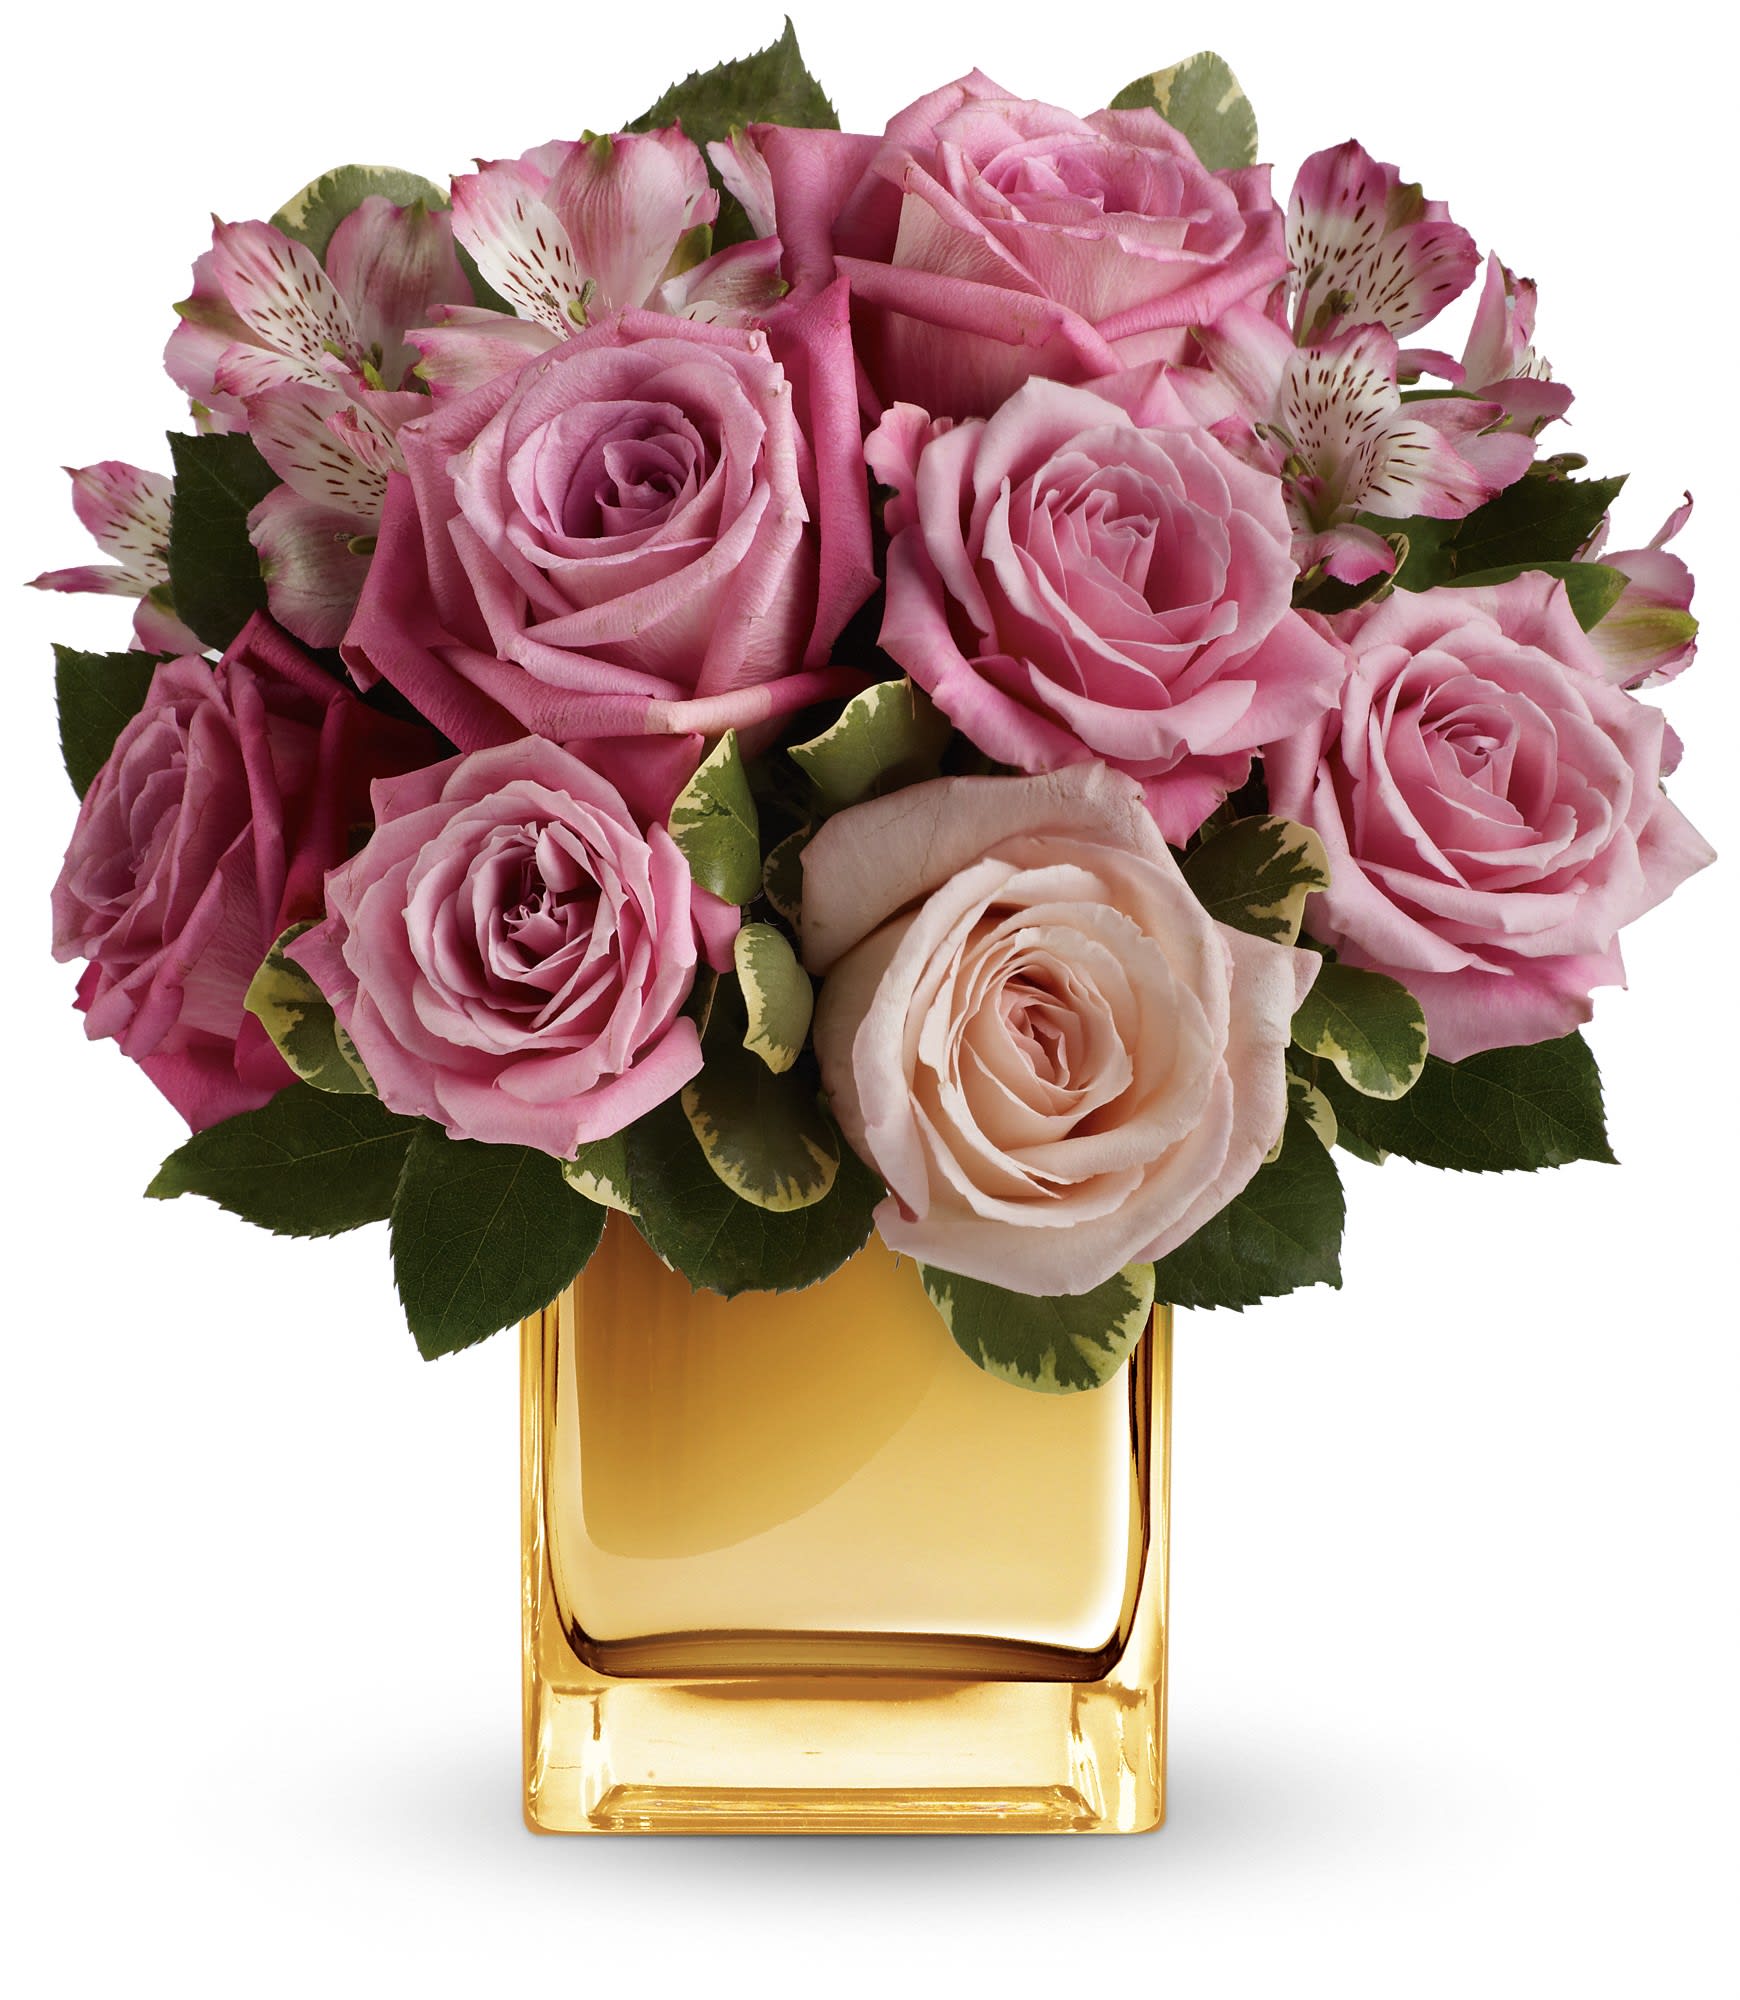 A Radiant Romance bouquet - Ravishing roses and a radiant cube vase combine to stunning effect in this amazing arrangement featuring soft, romantic shades of pink and lavender. It's sure to make her heart radiate with love and affection!